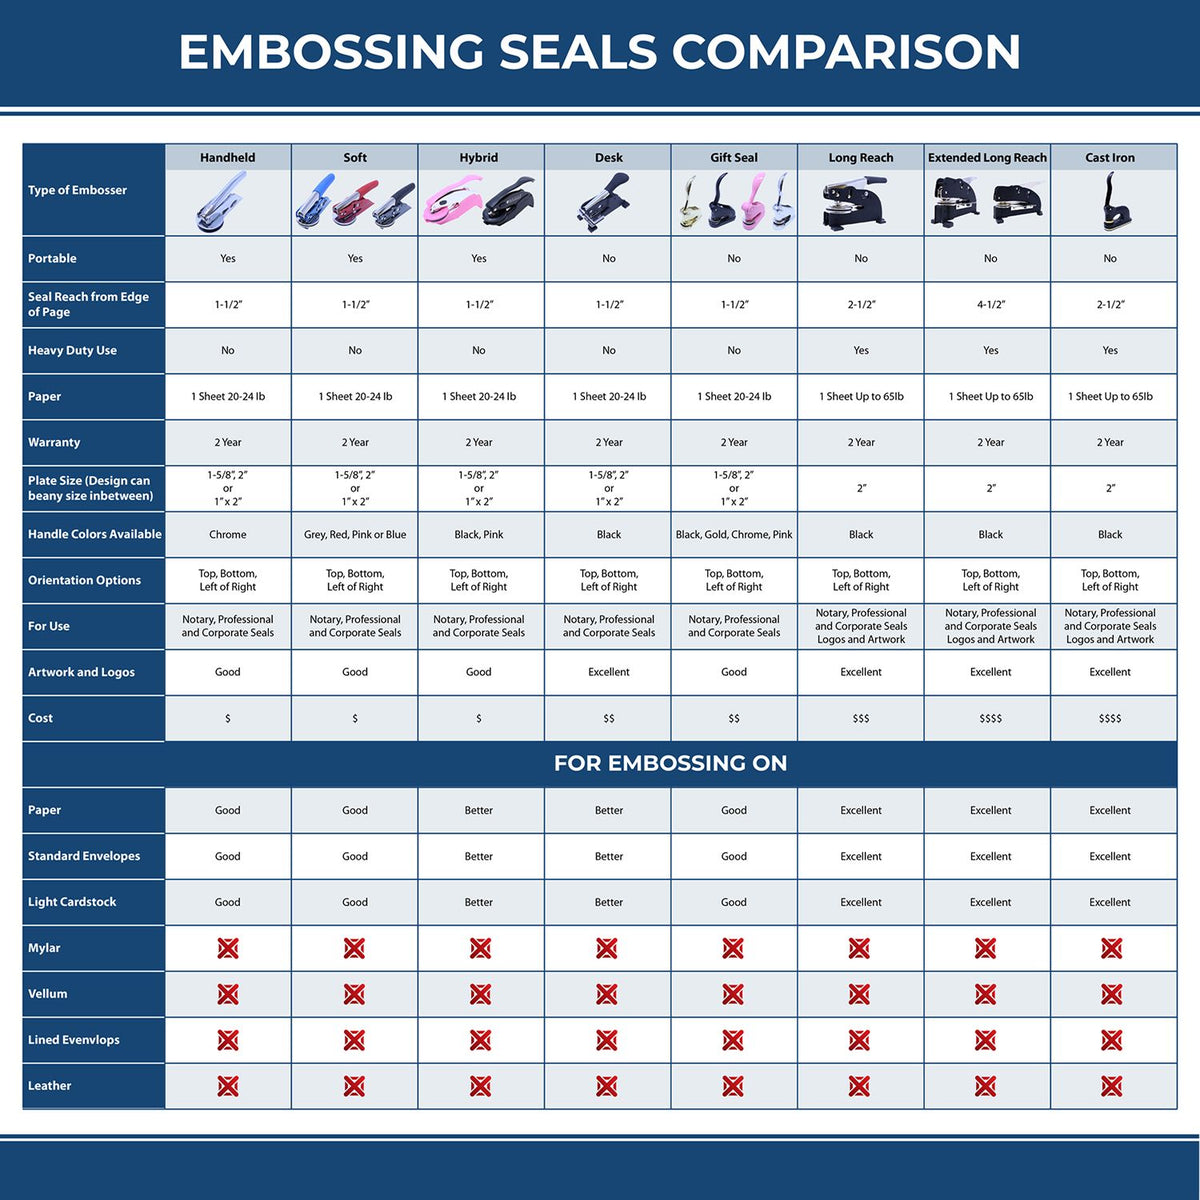 A comparison chart for the different types of mount models available for the State of Michigan Soft Land Surveyor Embossing Seal.